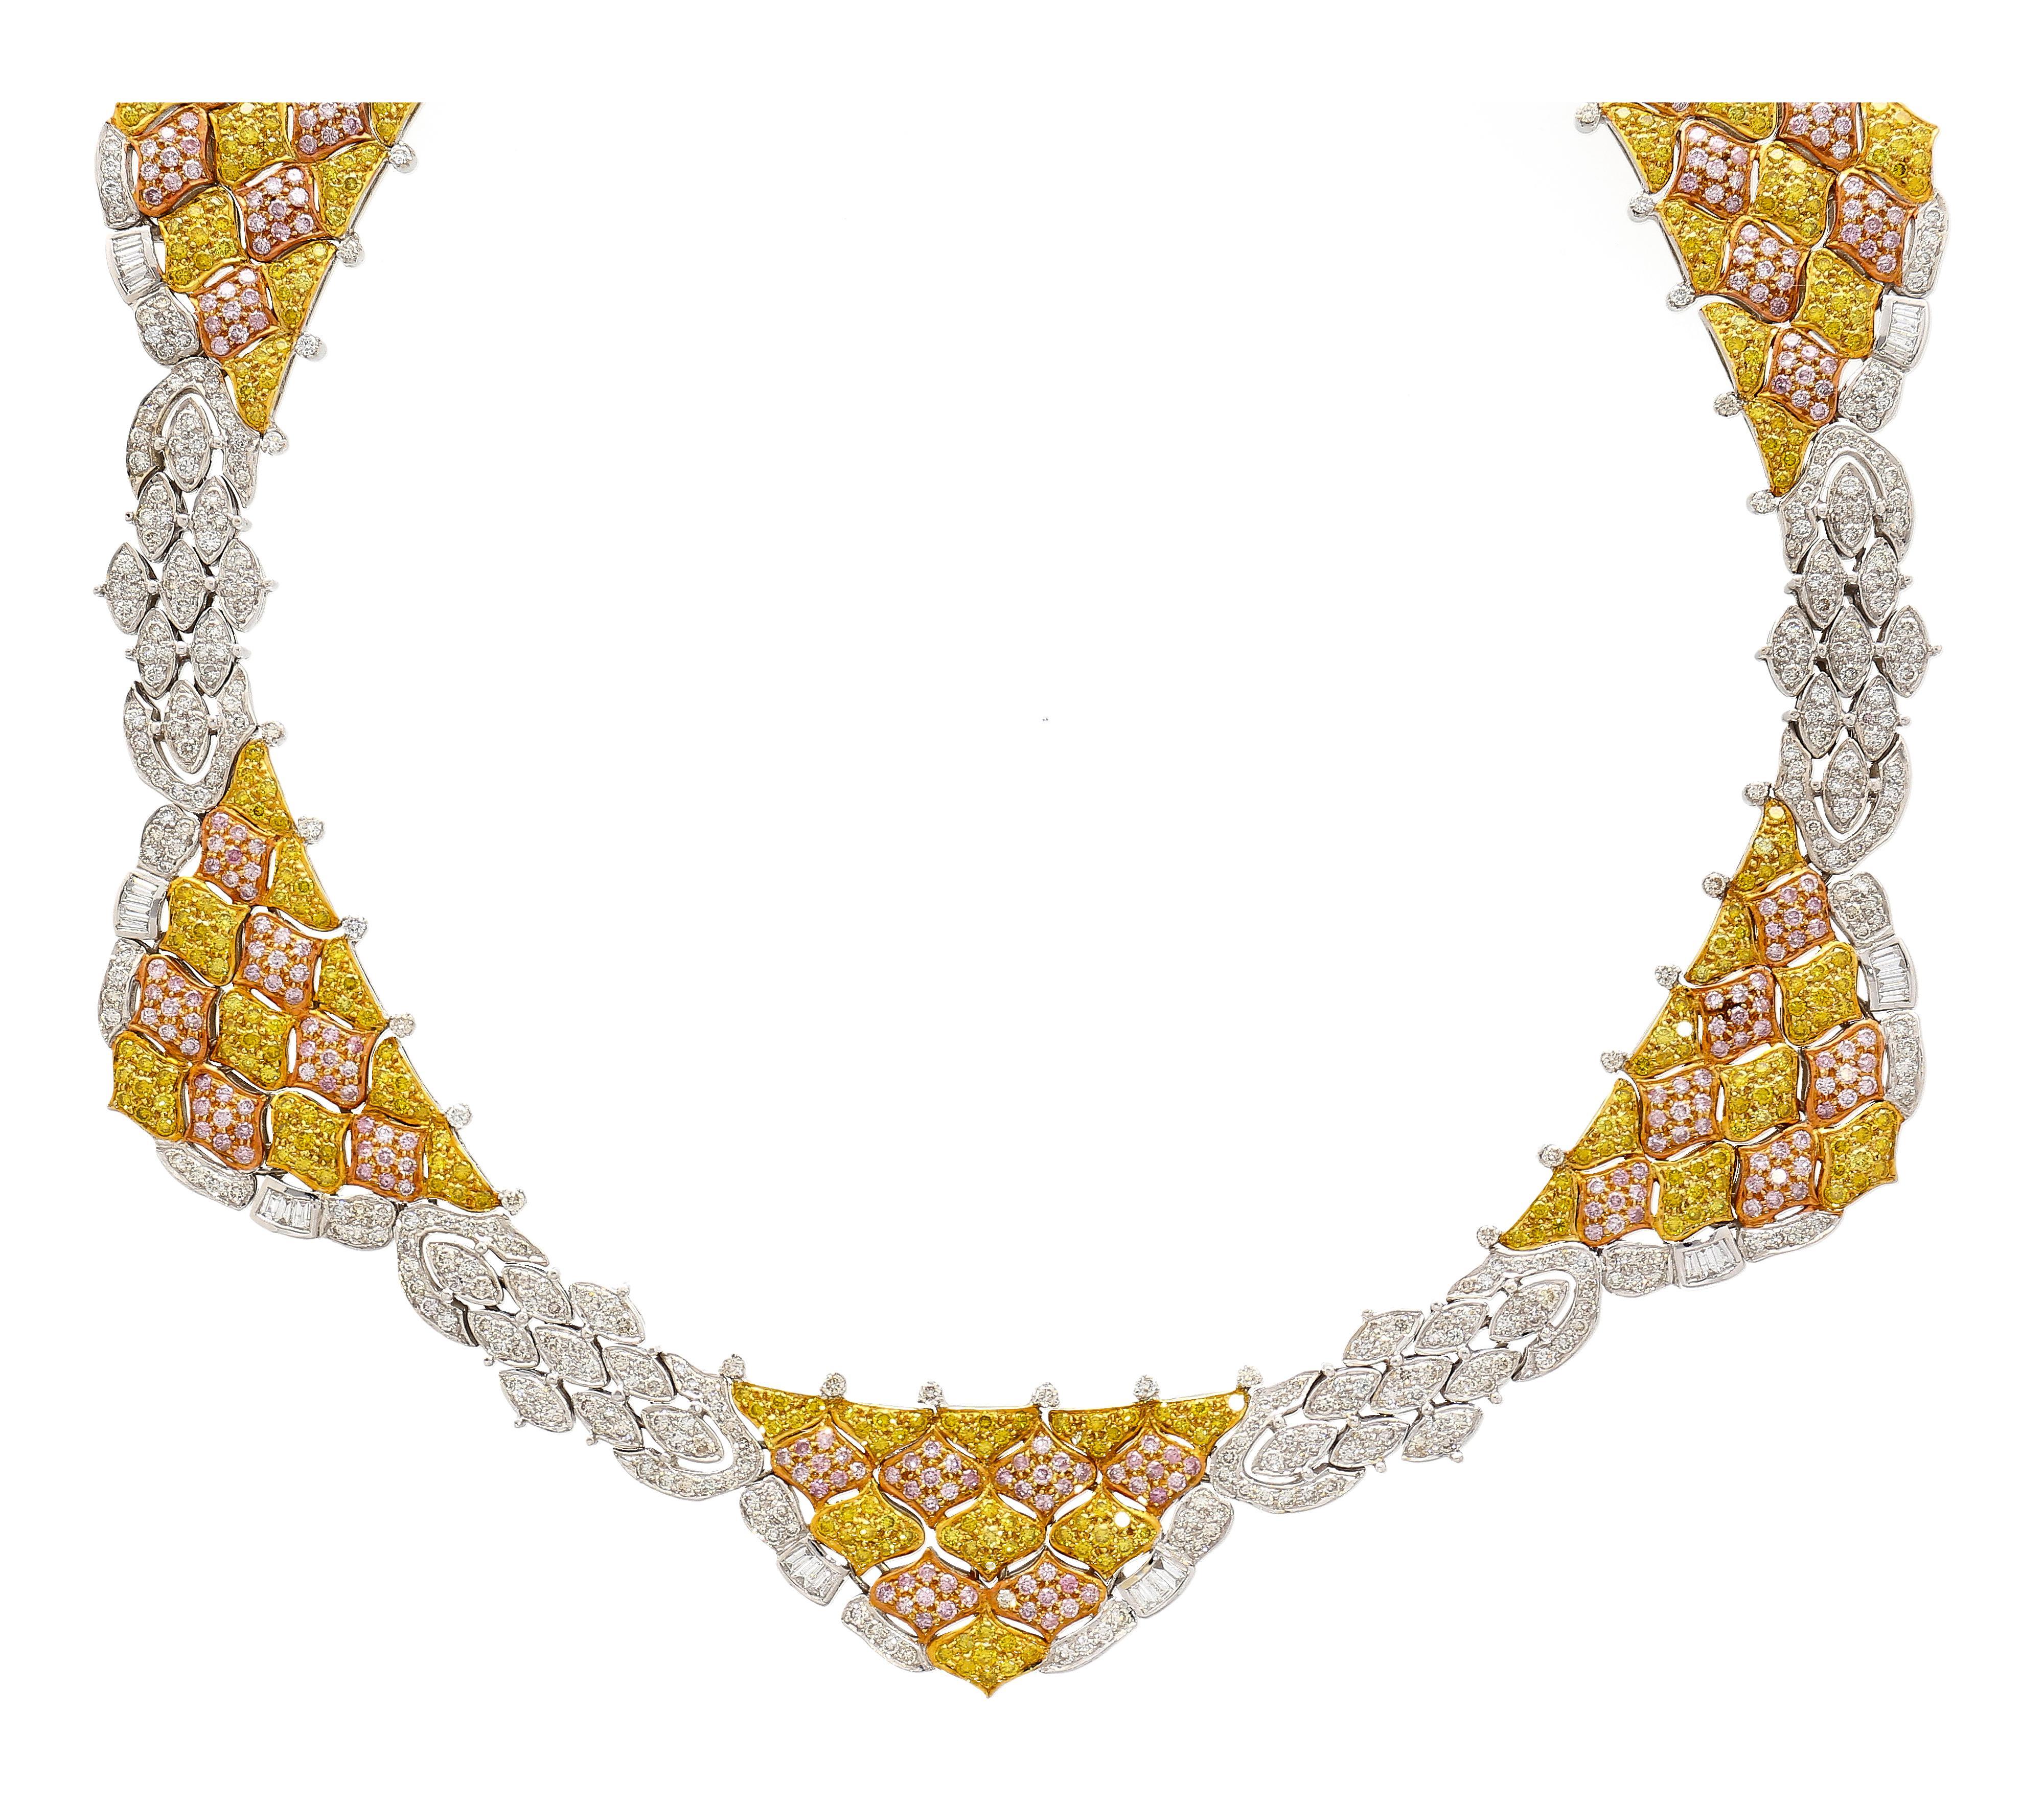 Natural 35 Carat Pink, White, & Yellow Diamond 18K Three Tone Necklace Choker In New Condition For Sale In Miami, FL